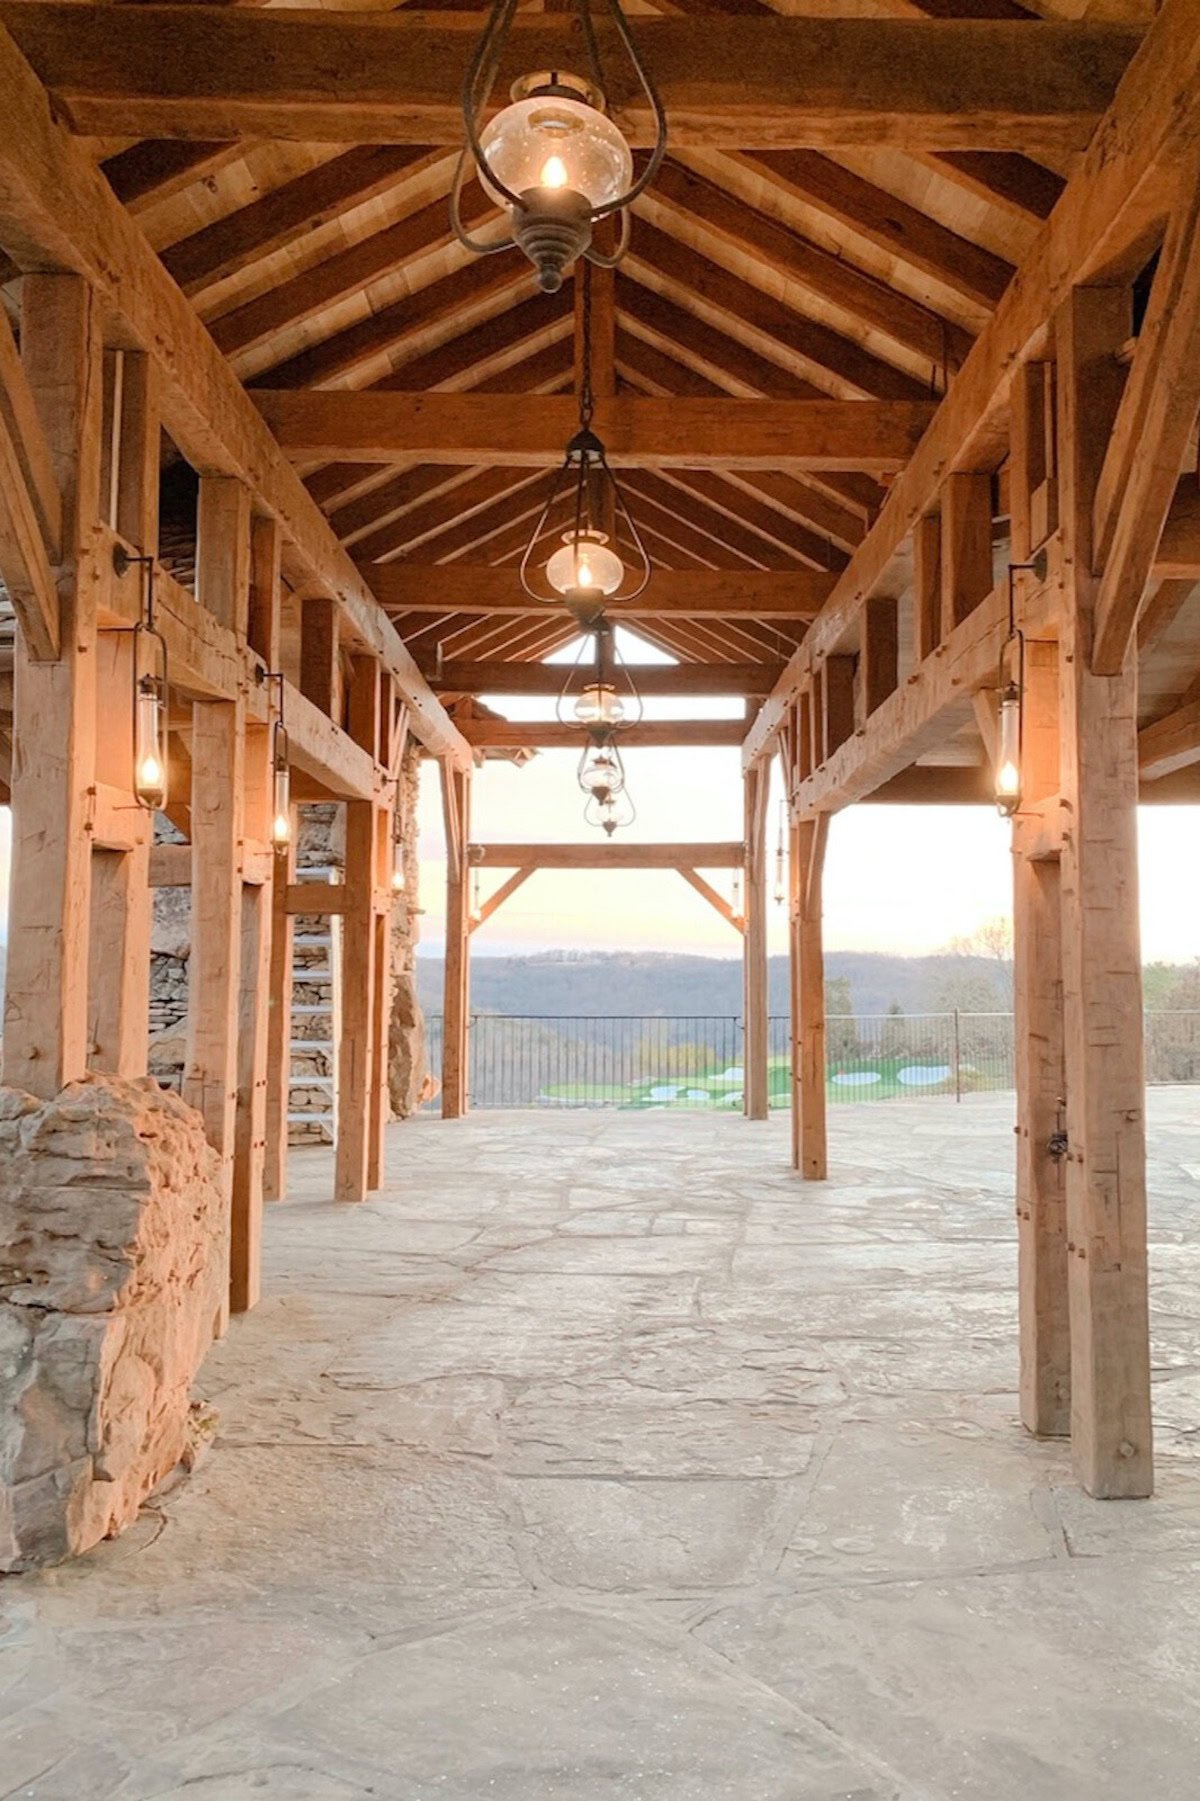 A covered walkway with wooden beams, hanging lanterns, and stone flooring overlooking a scenic landscape at sunset is one of the enchanting things to do in Branson.